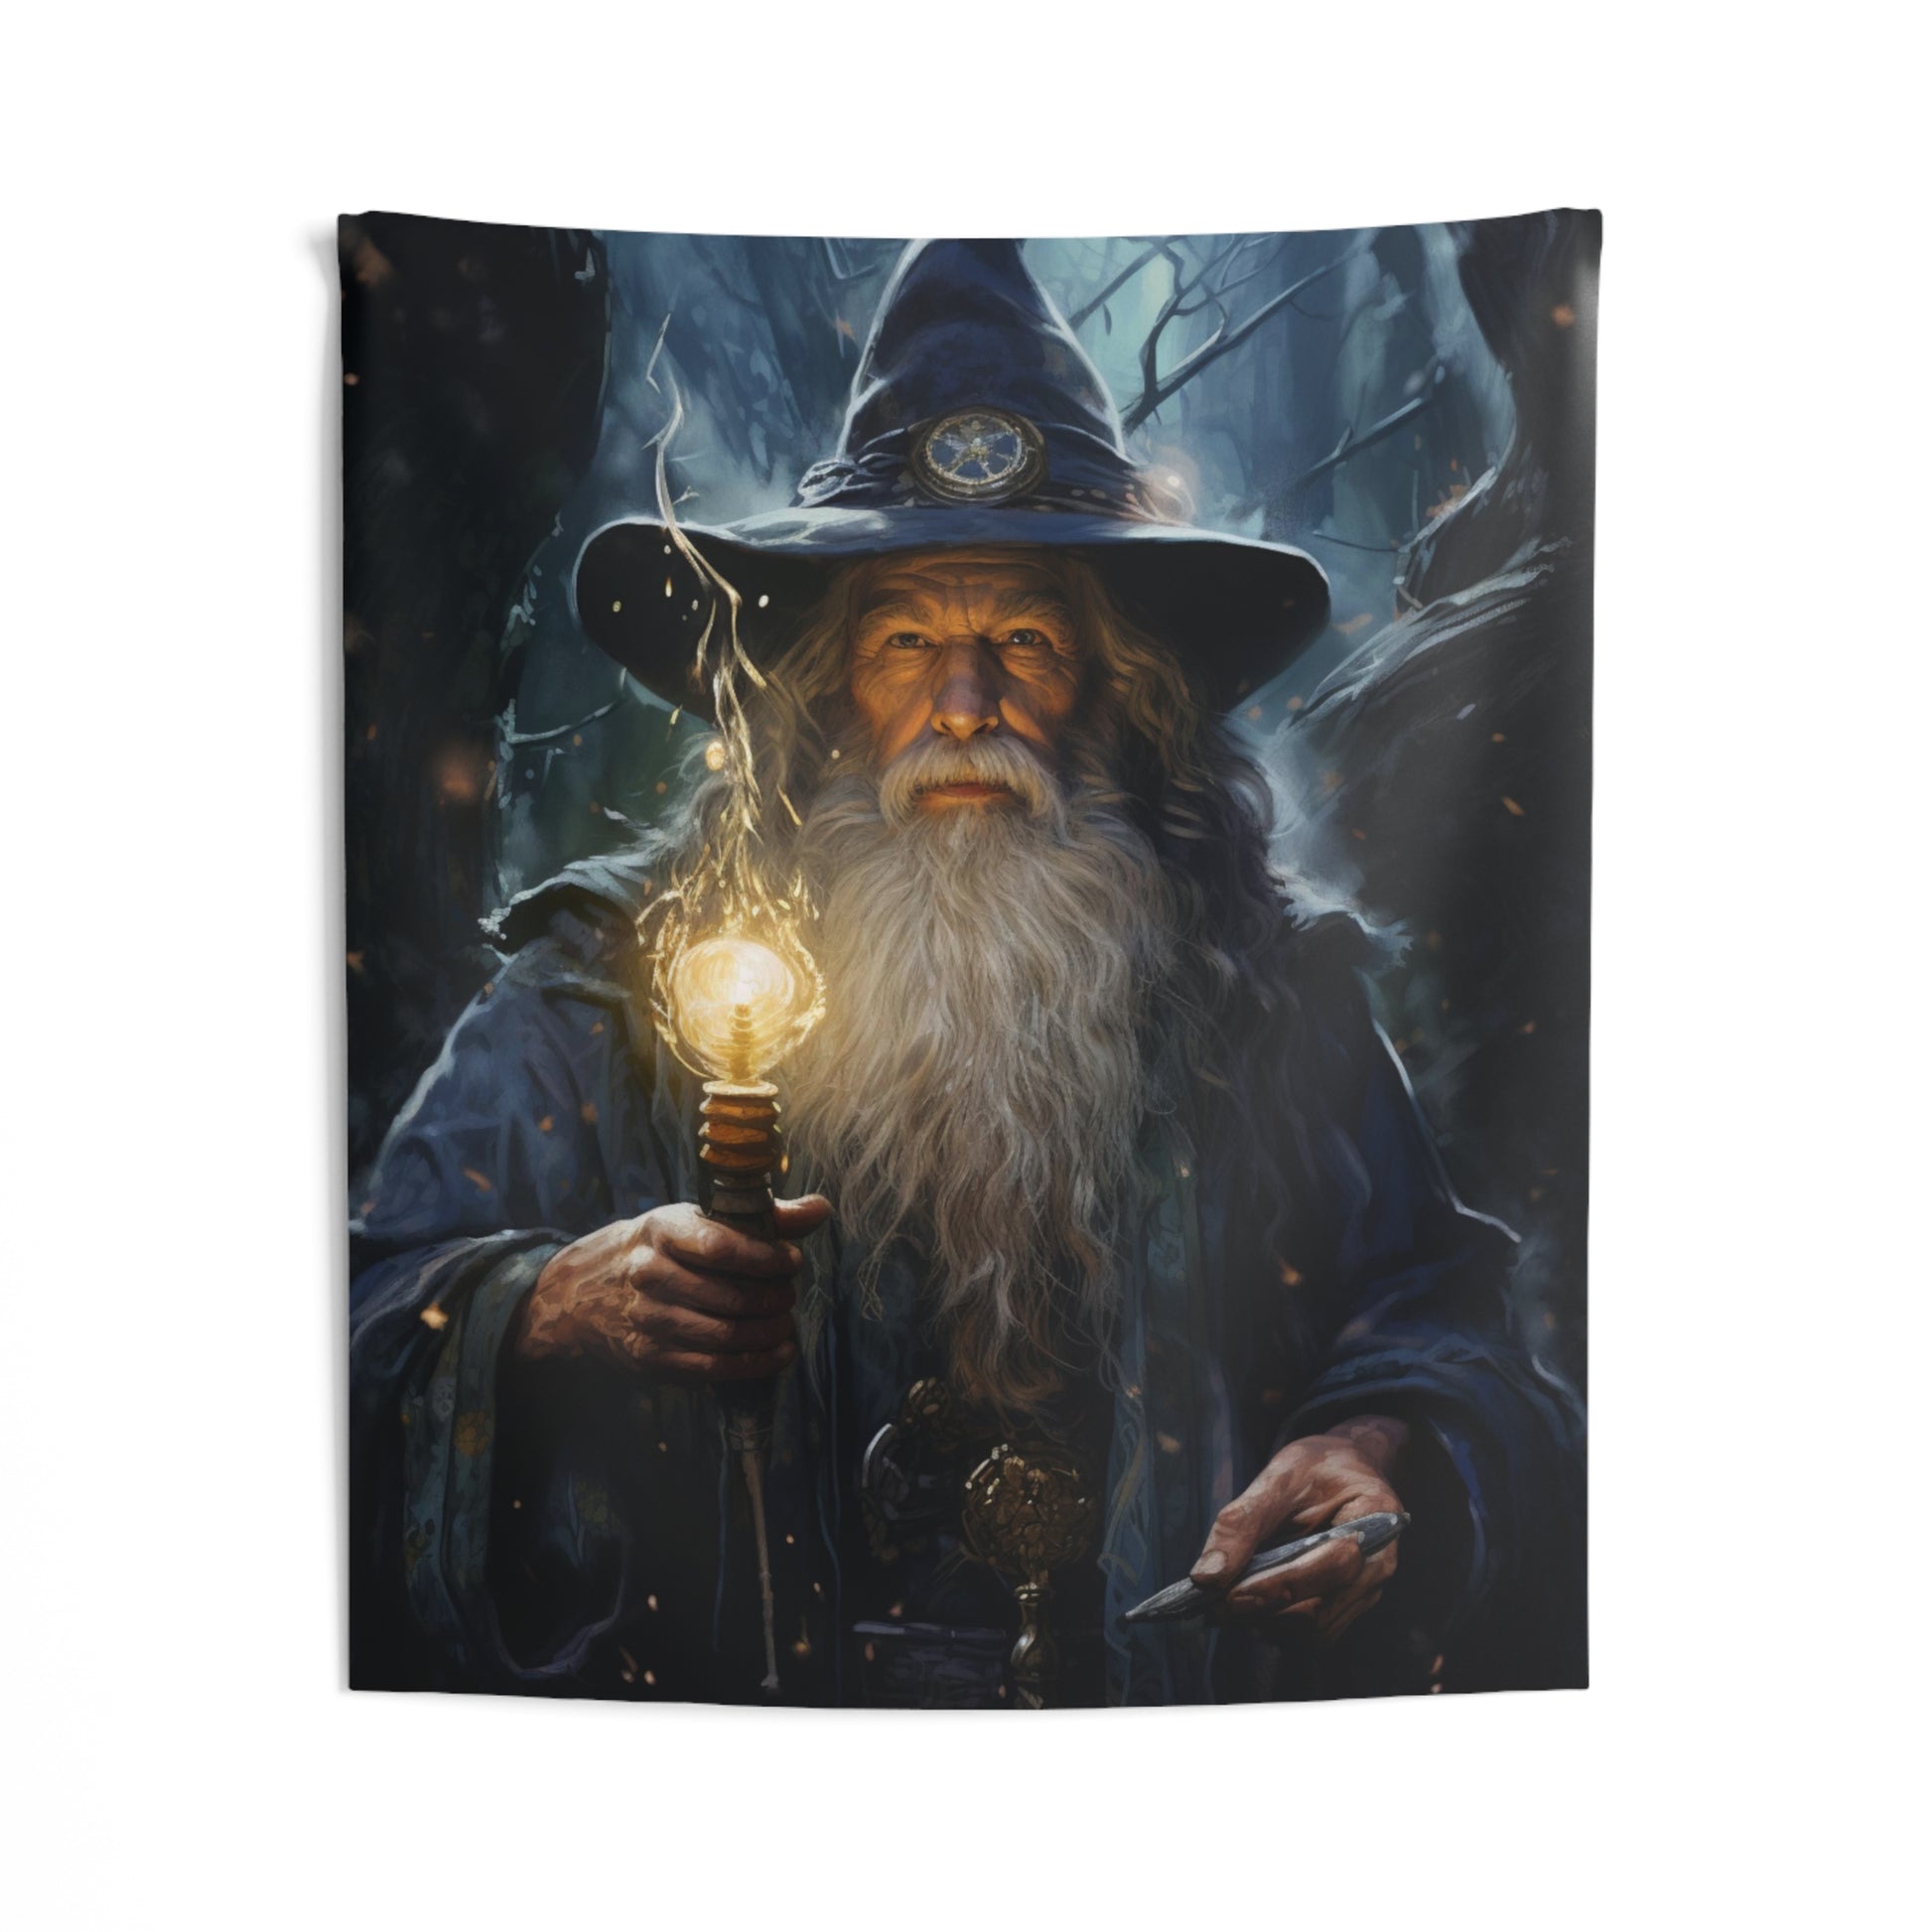 Wizard Tapestry, Mage Magic Wall Art Hanging Cool Unique Vertical Aesthetic Large Small Decor Bedroom College Dorm Room Starcove Fashion